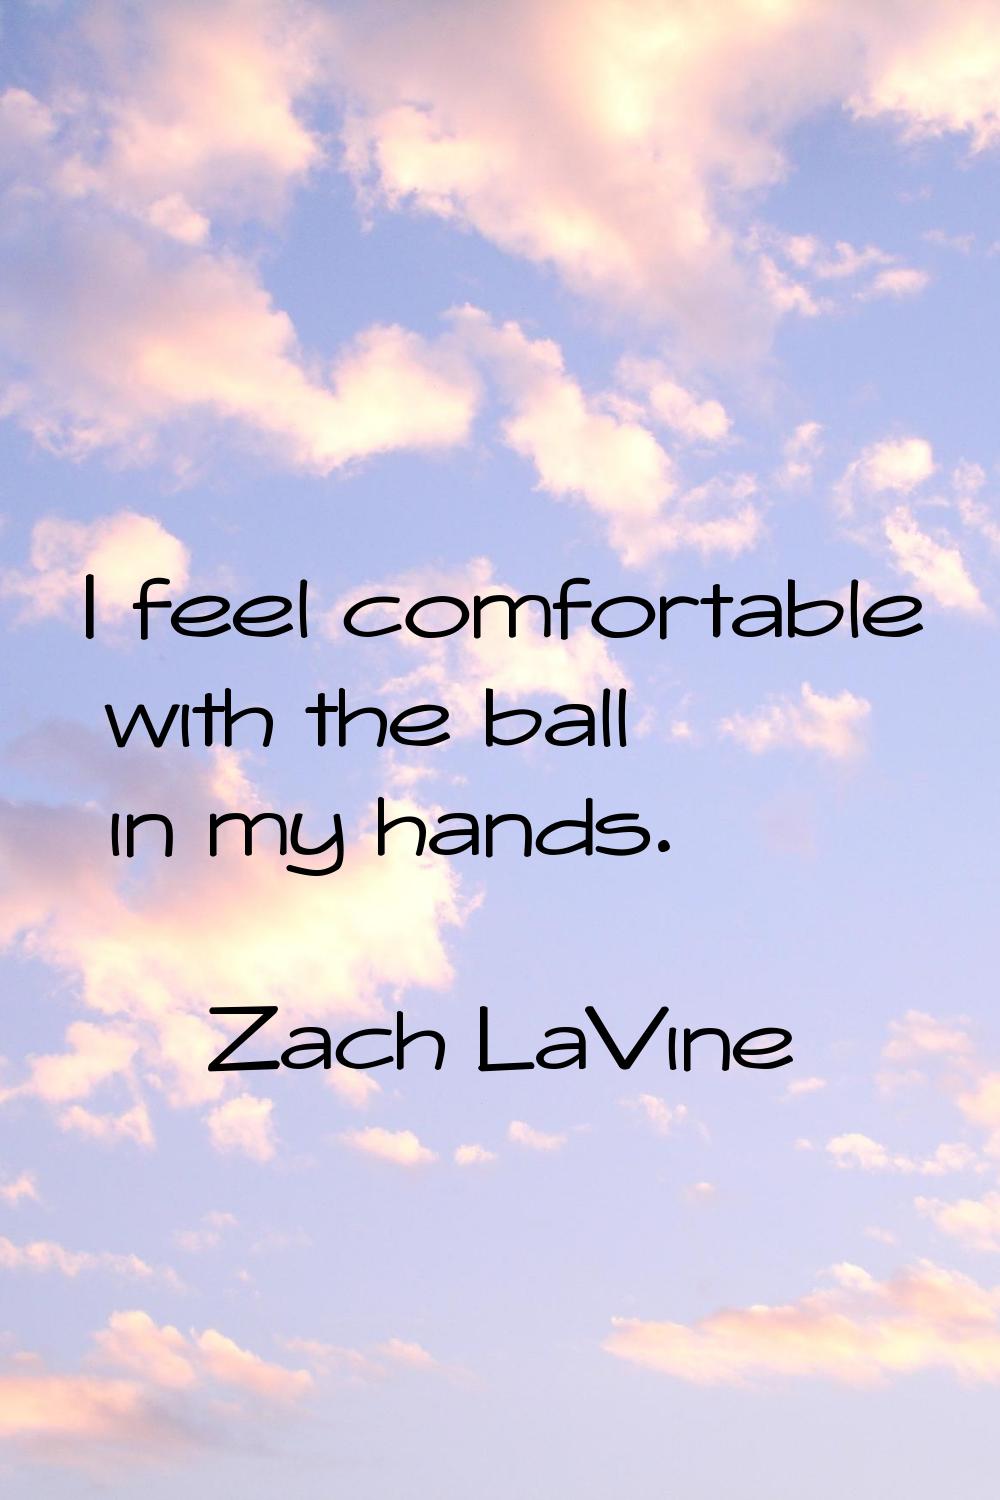 I feel comfortable with the ball in my hands.